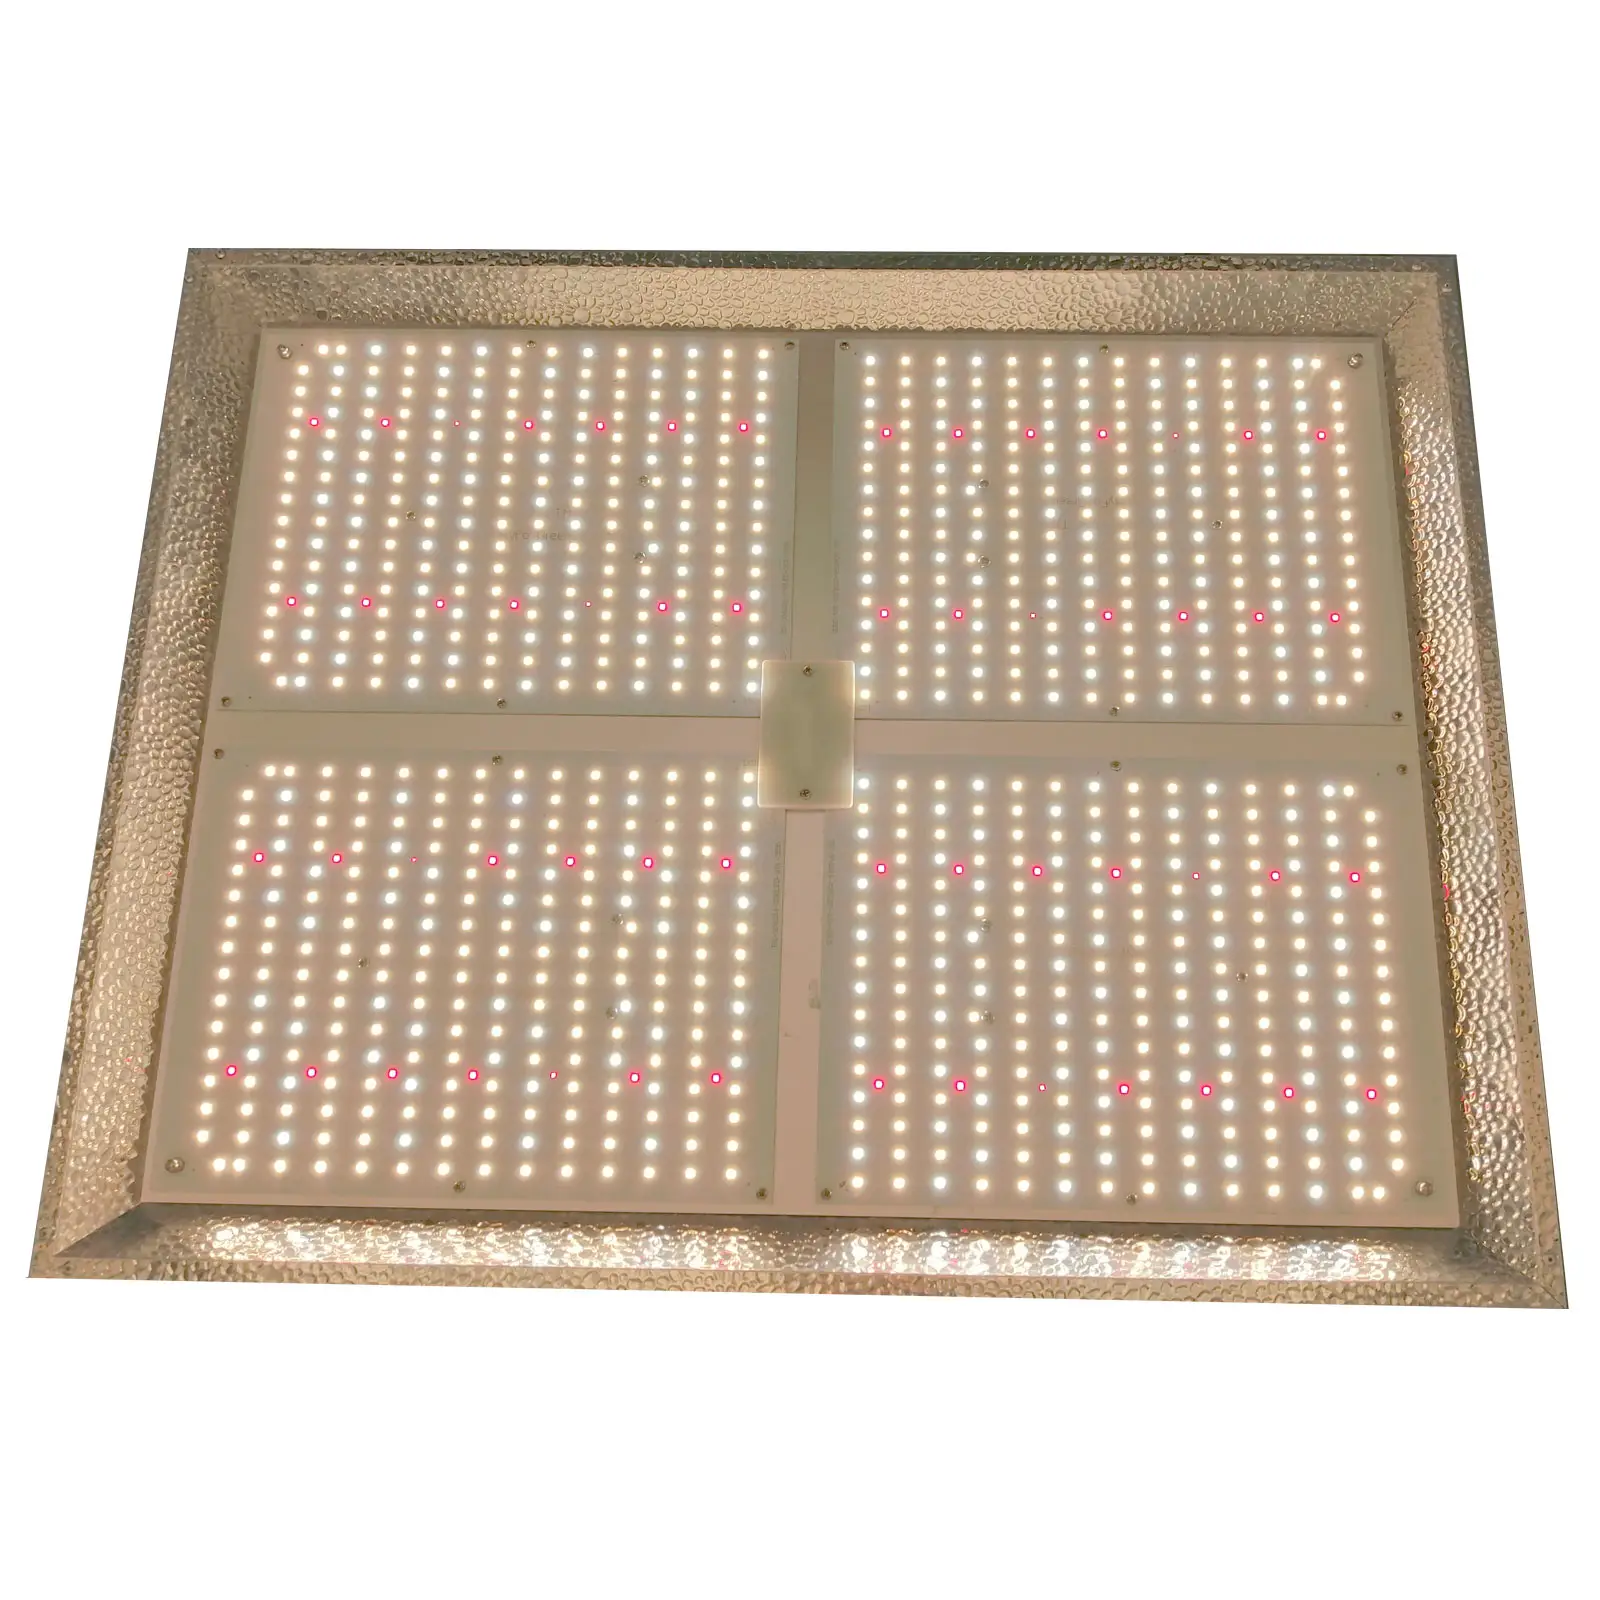 600W LED Grow Light 3200-3400K full spectrum with reflector flower mainly wavelength with red light plant factory